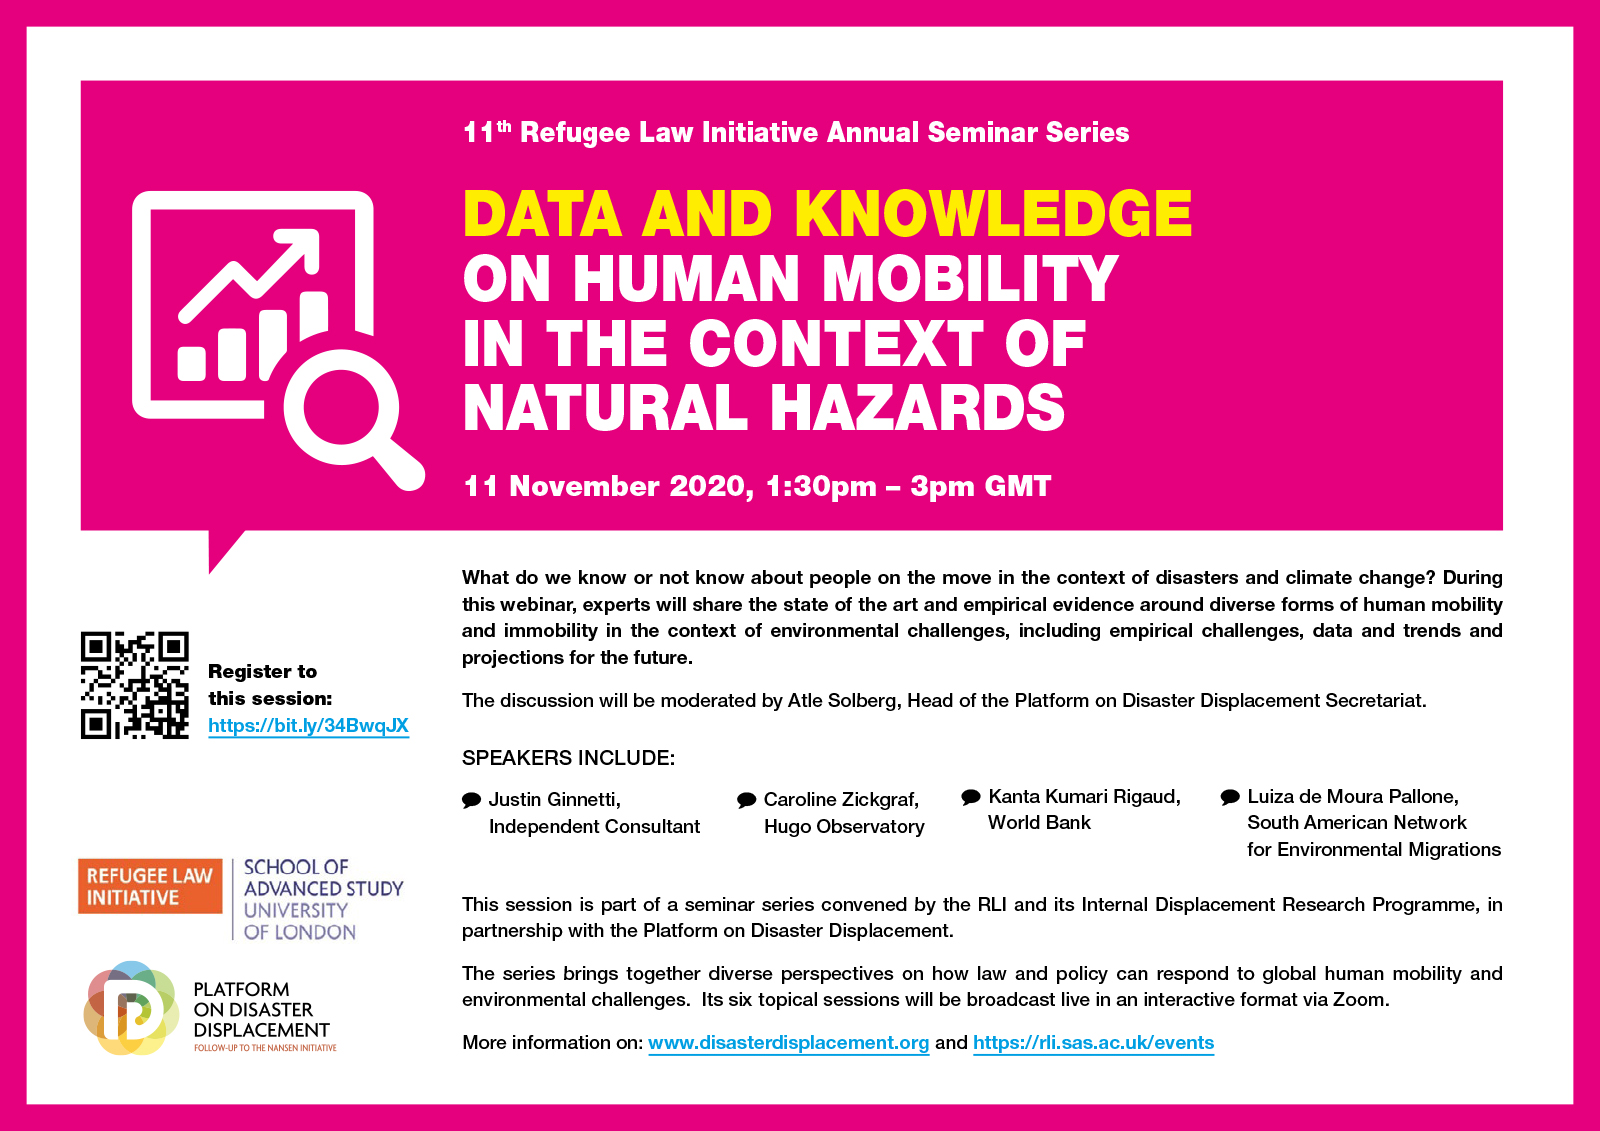 Flyer For The Event 'Data And Knowledge On Human Mobility In The Context Of Natural Hazards' With A Picture Of A Graph And Lens And A Blurb, List Of Speakers, Registration Link And QR Code, And RLI And PDD Logos On A Pink And White Background